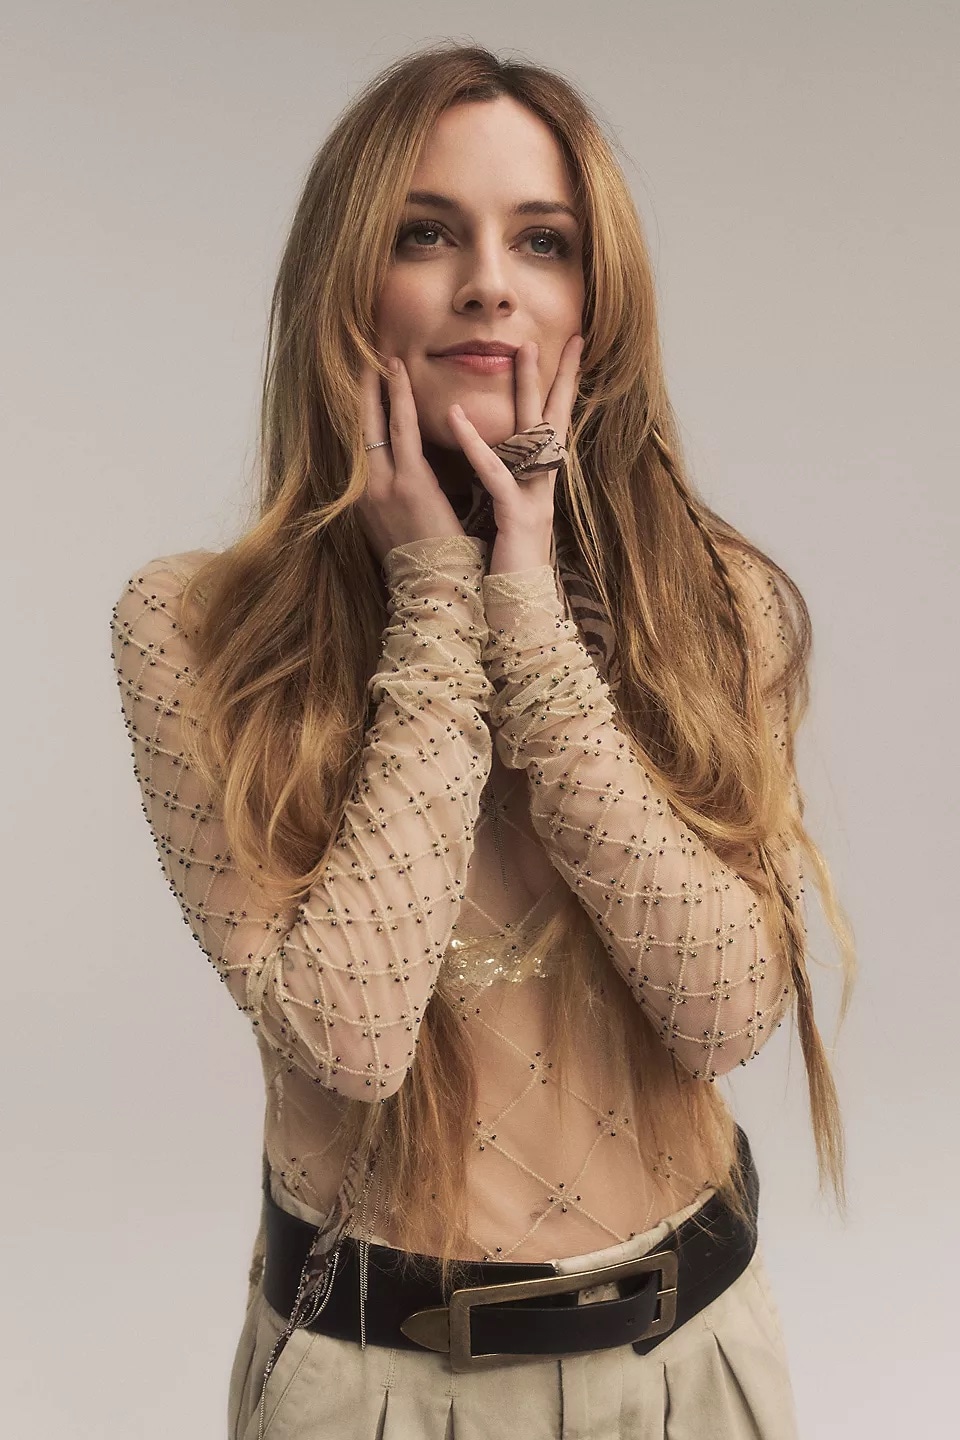 ECOMM: Riley Keough, Free People